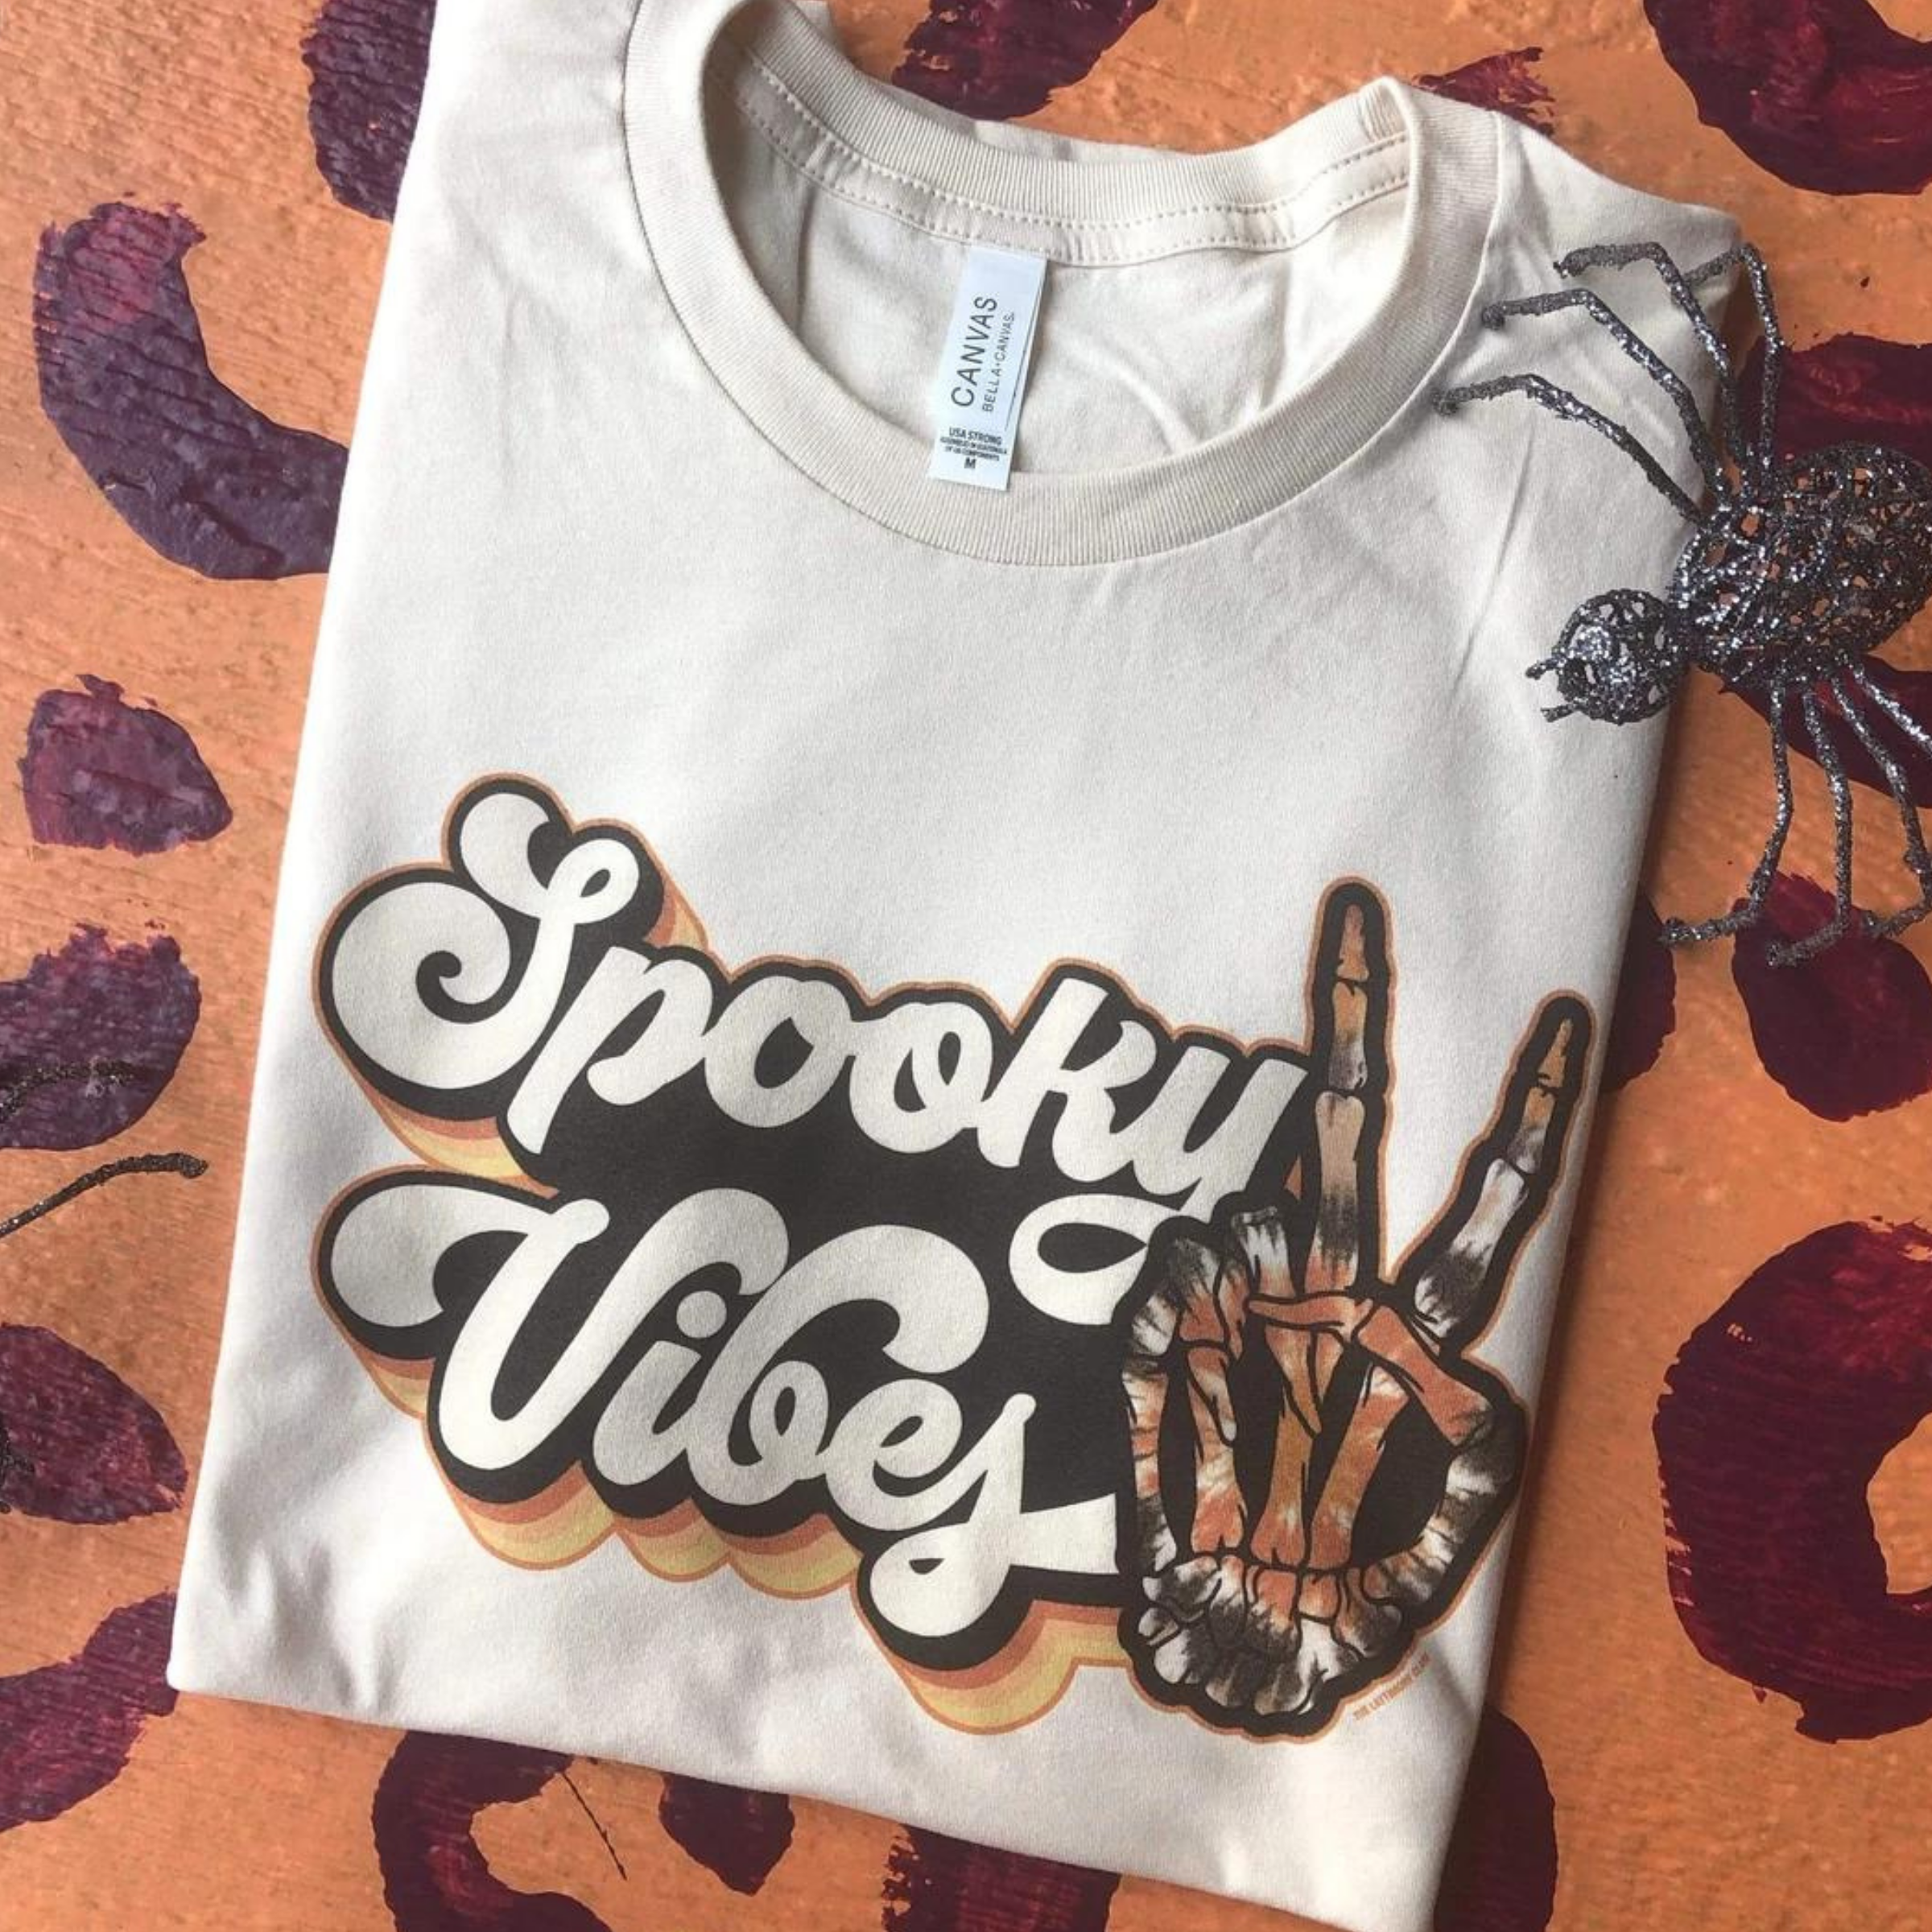 cream graphic tee that reads "spooky vibes" in a groovy font with a skeleton hand doing a peace sign hand gesture. Tee is laying on a leopard print backdrop with a fake spider as a prop. 